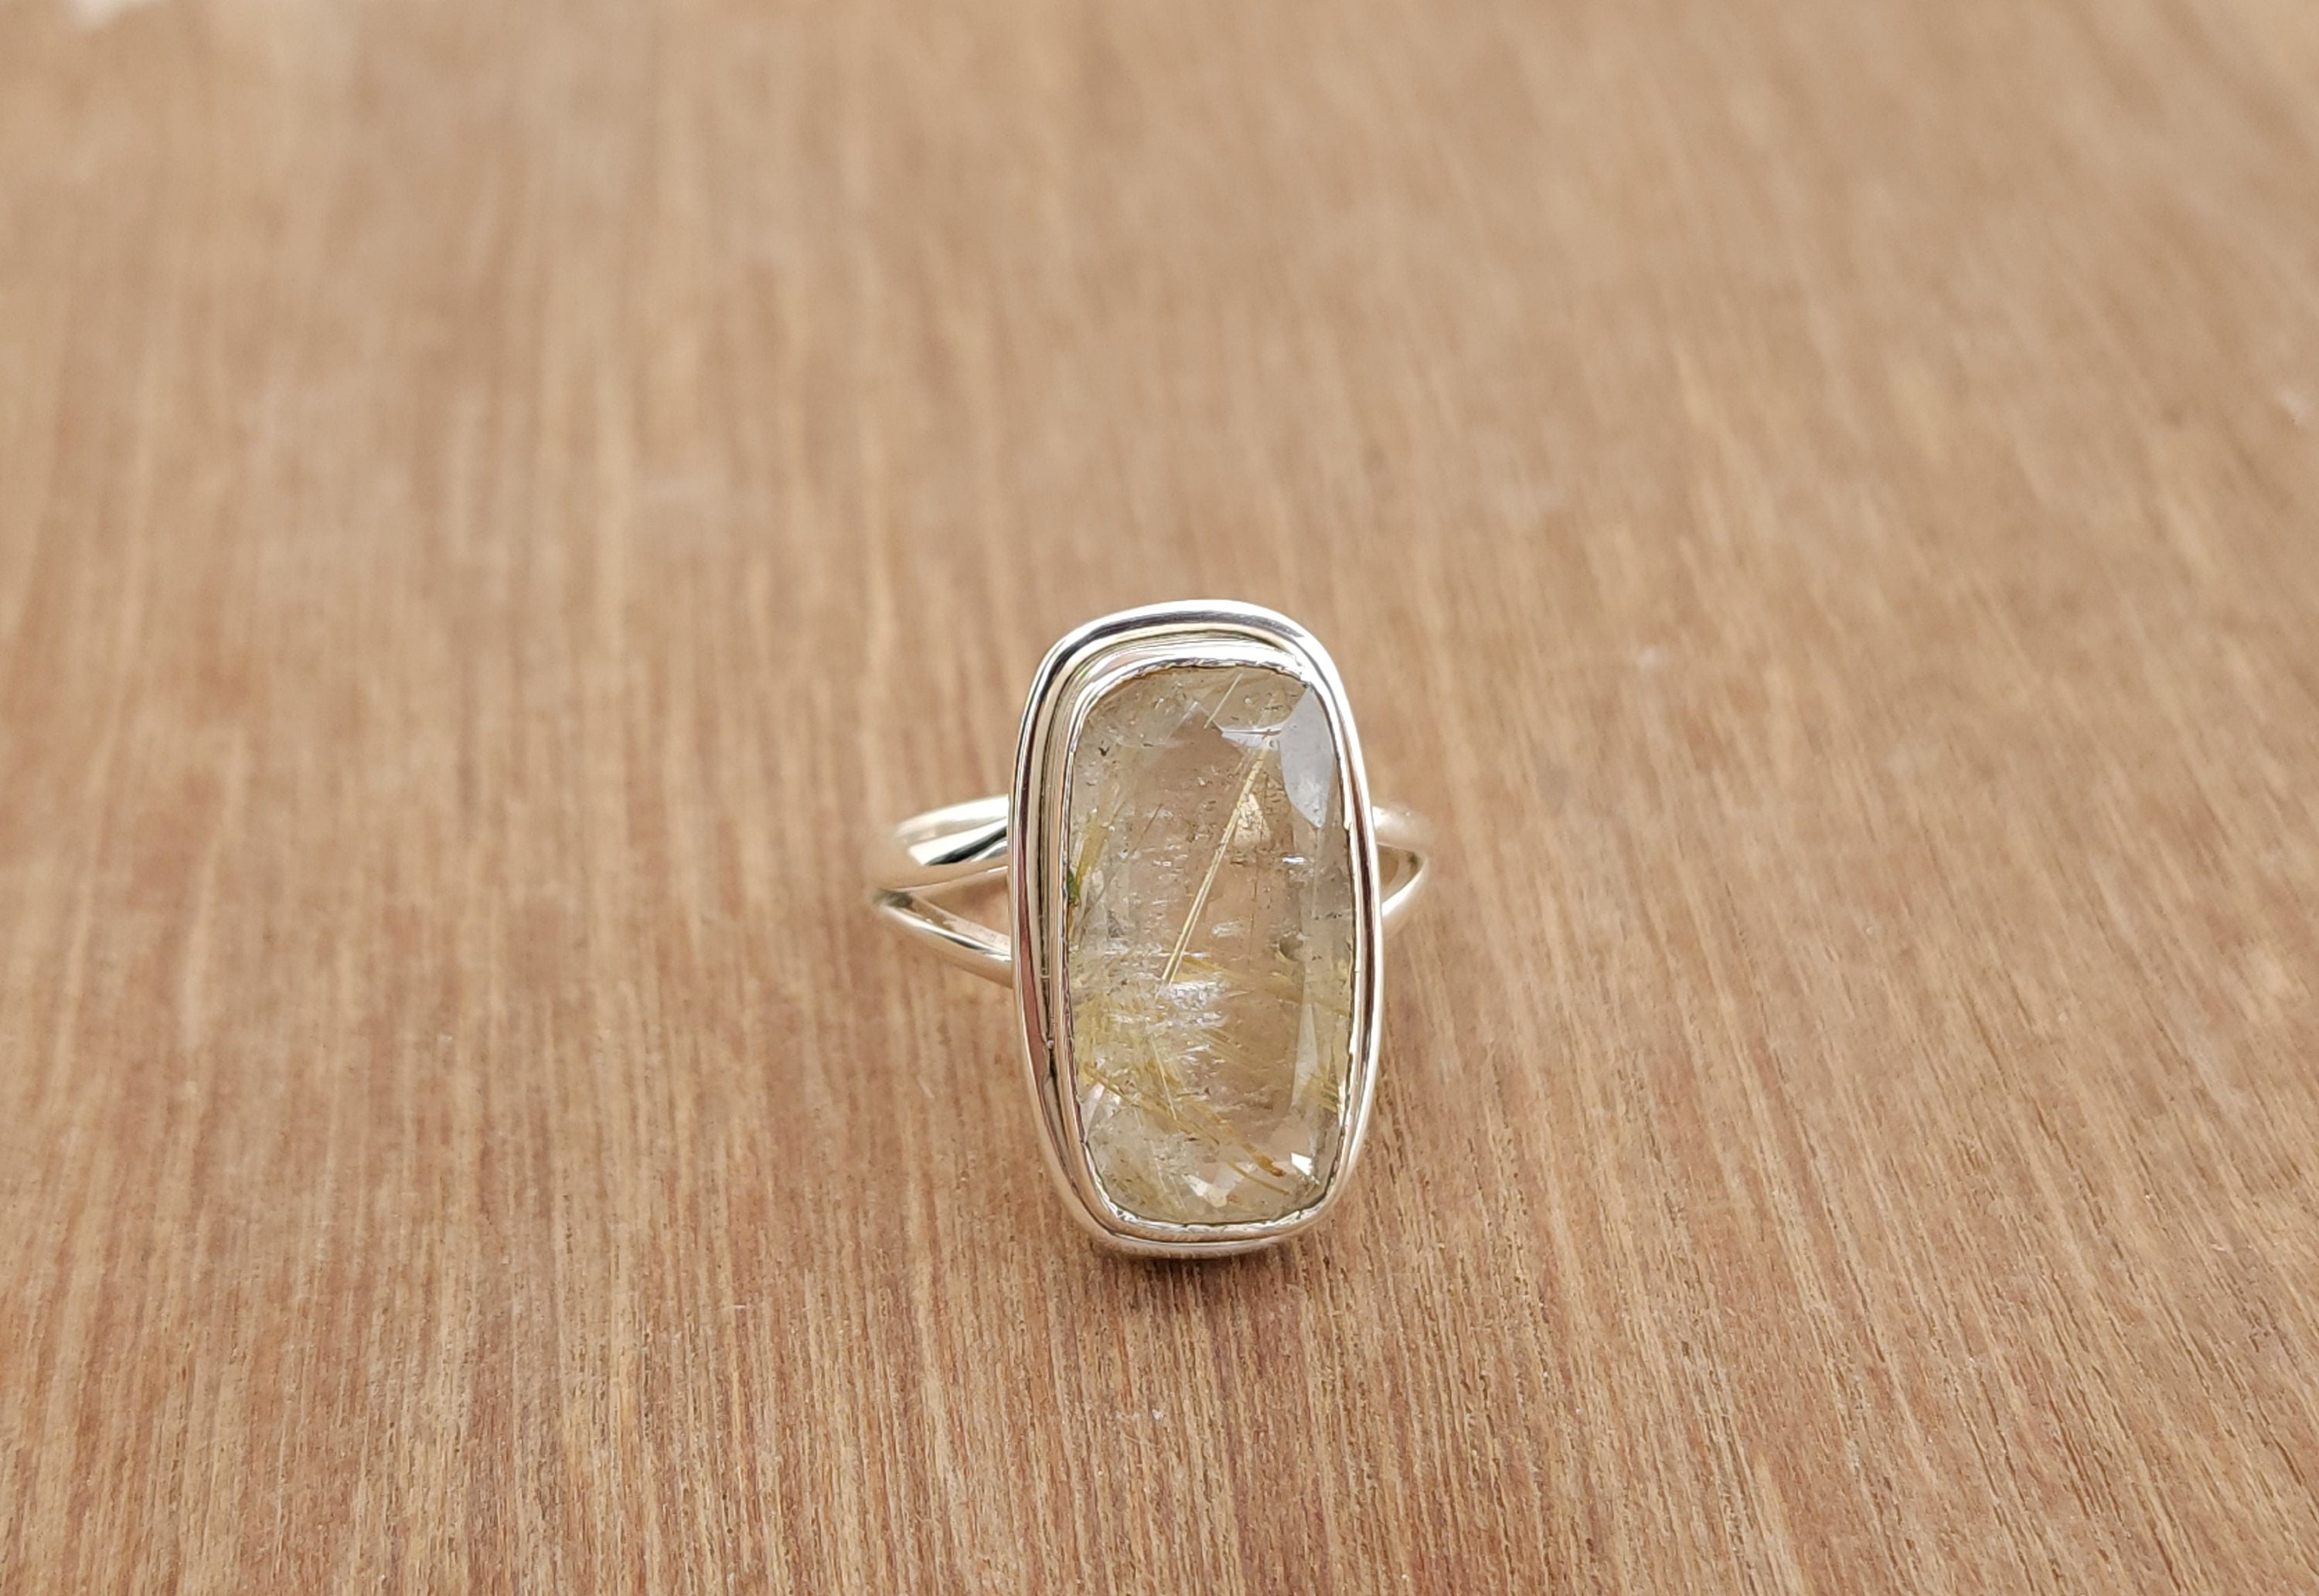 Golden Rutile 925 Silver Plated Handmade Jewelry Ring US Size 10.25 R-19525